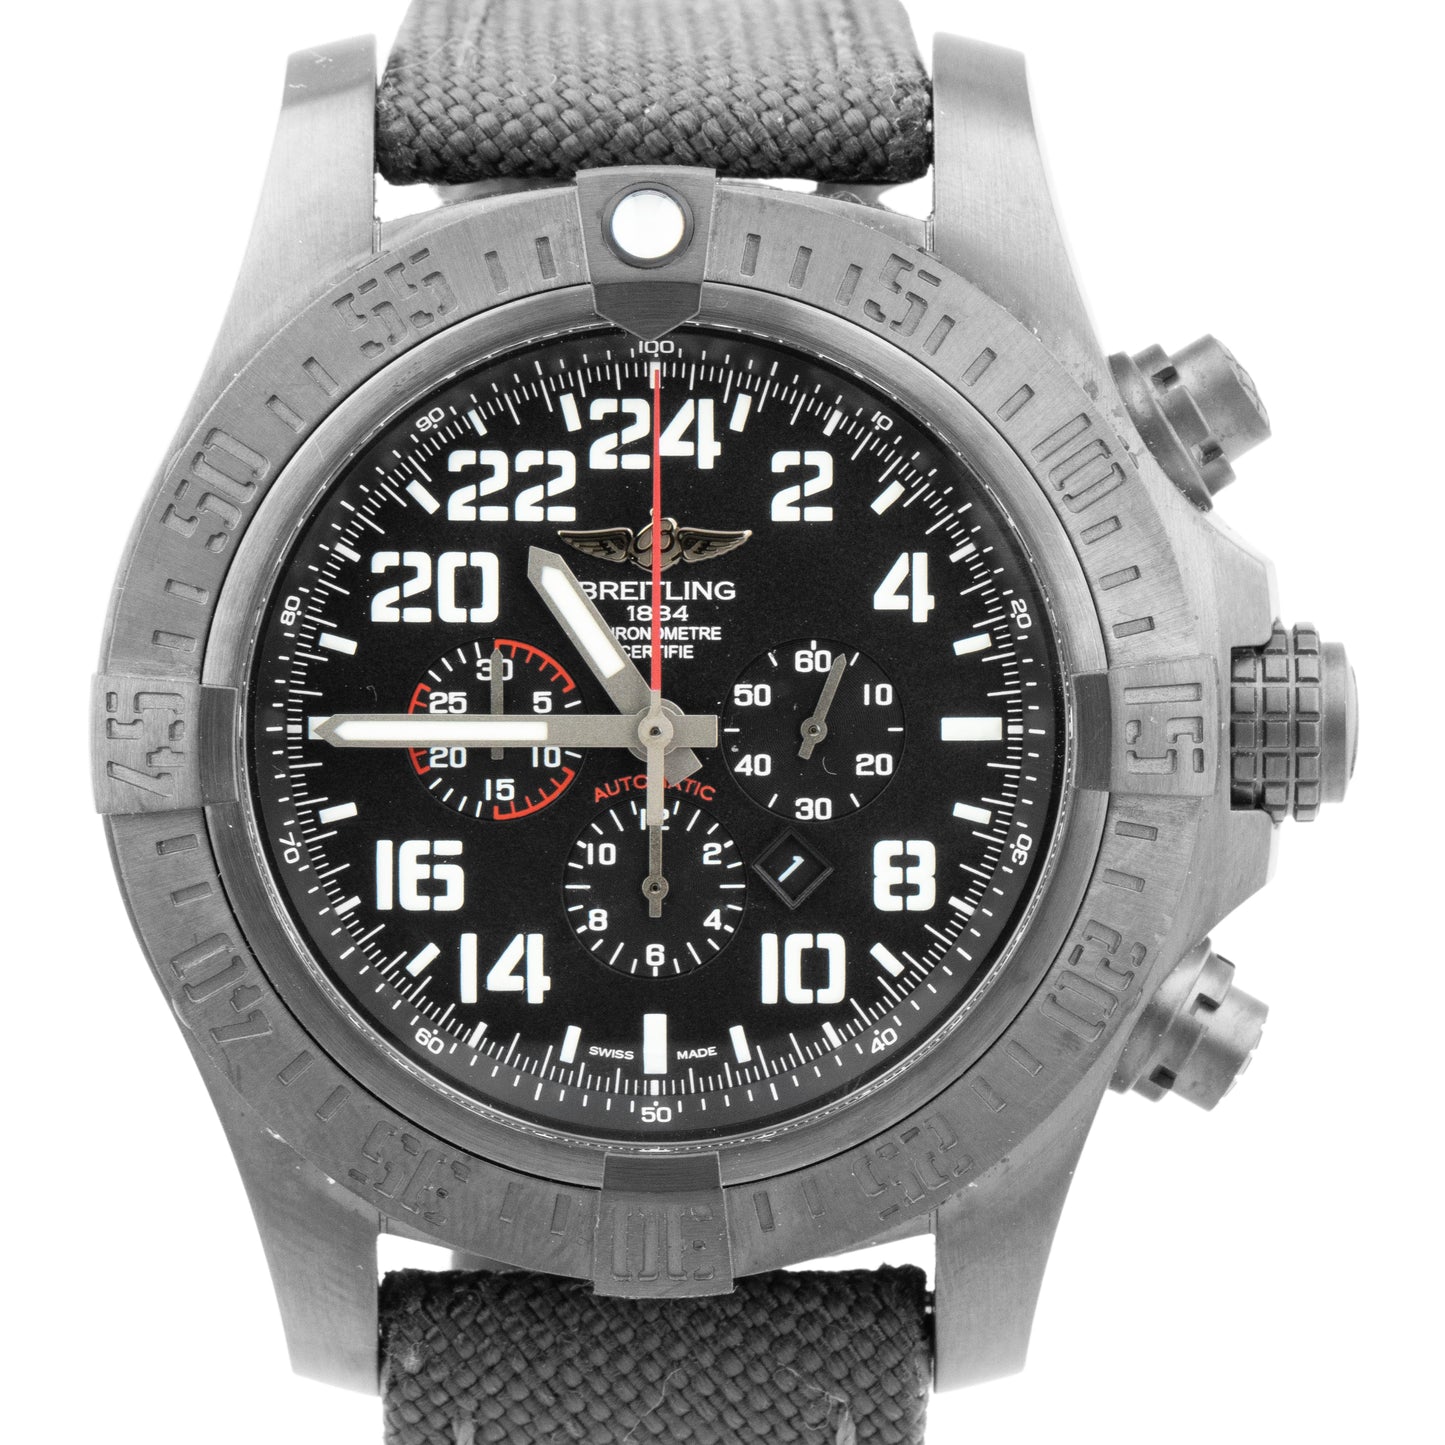 Breitling Super Avenger II Military Black Stainless Steel Date Watch M22330 B+P